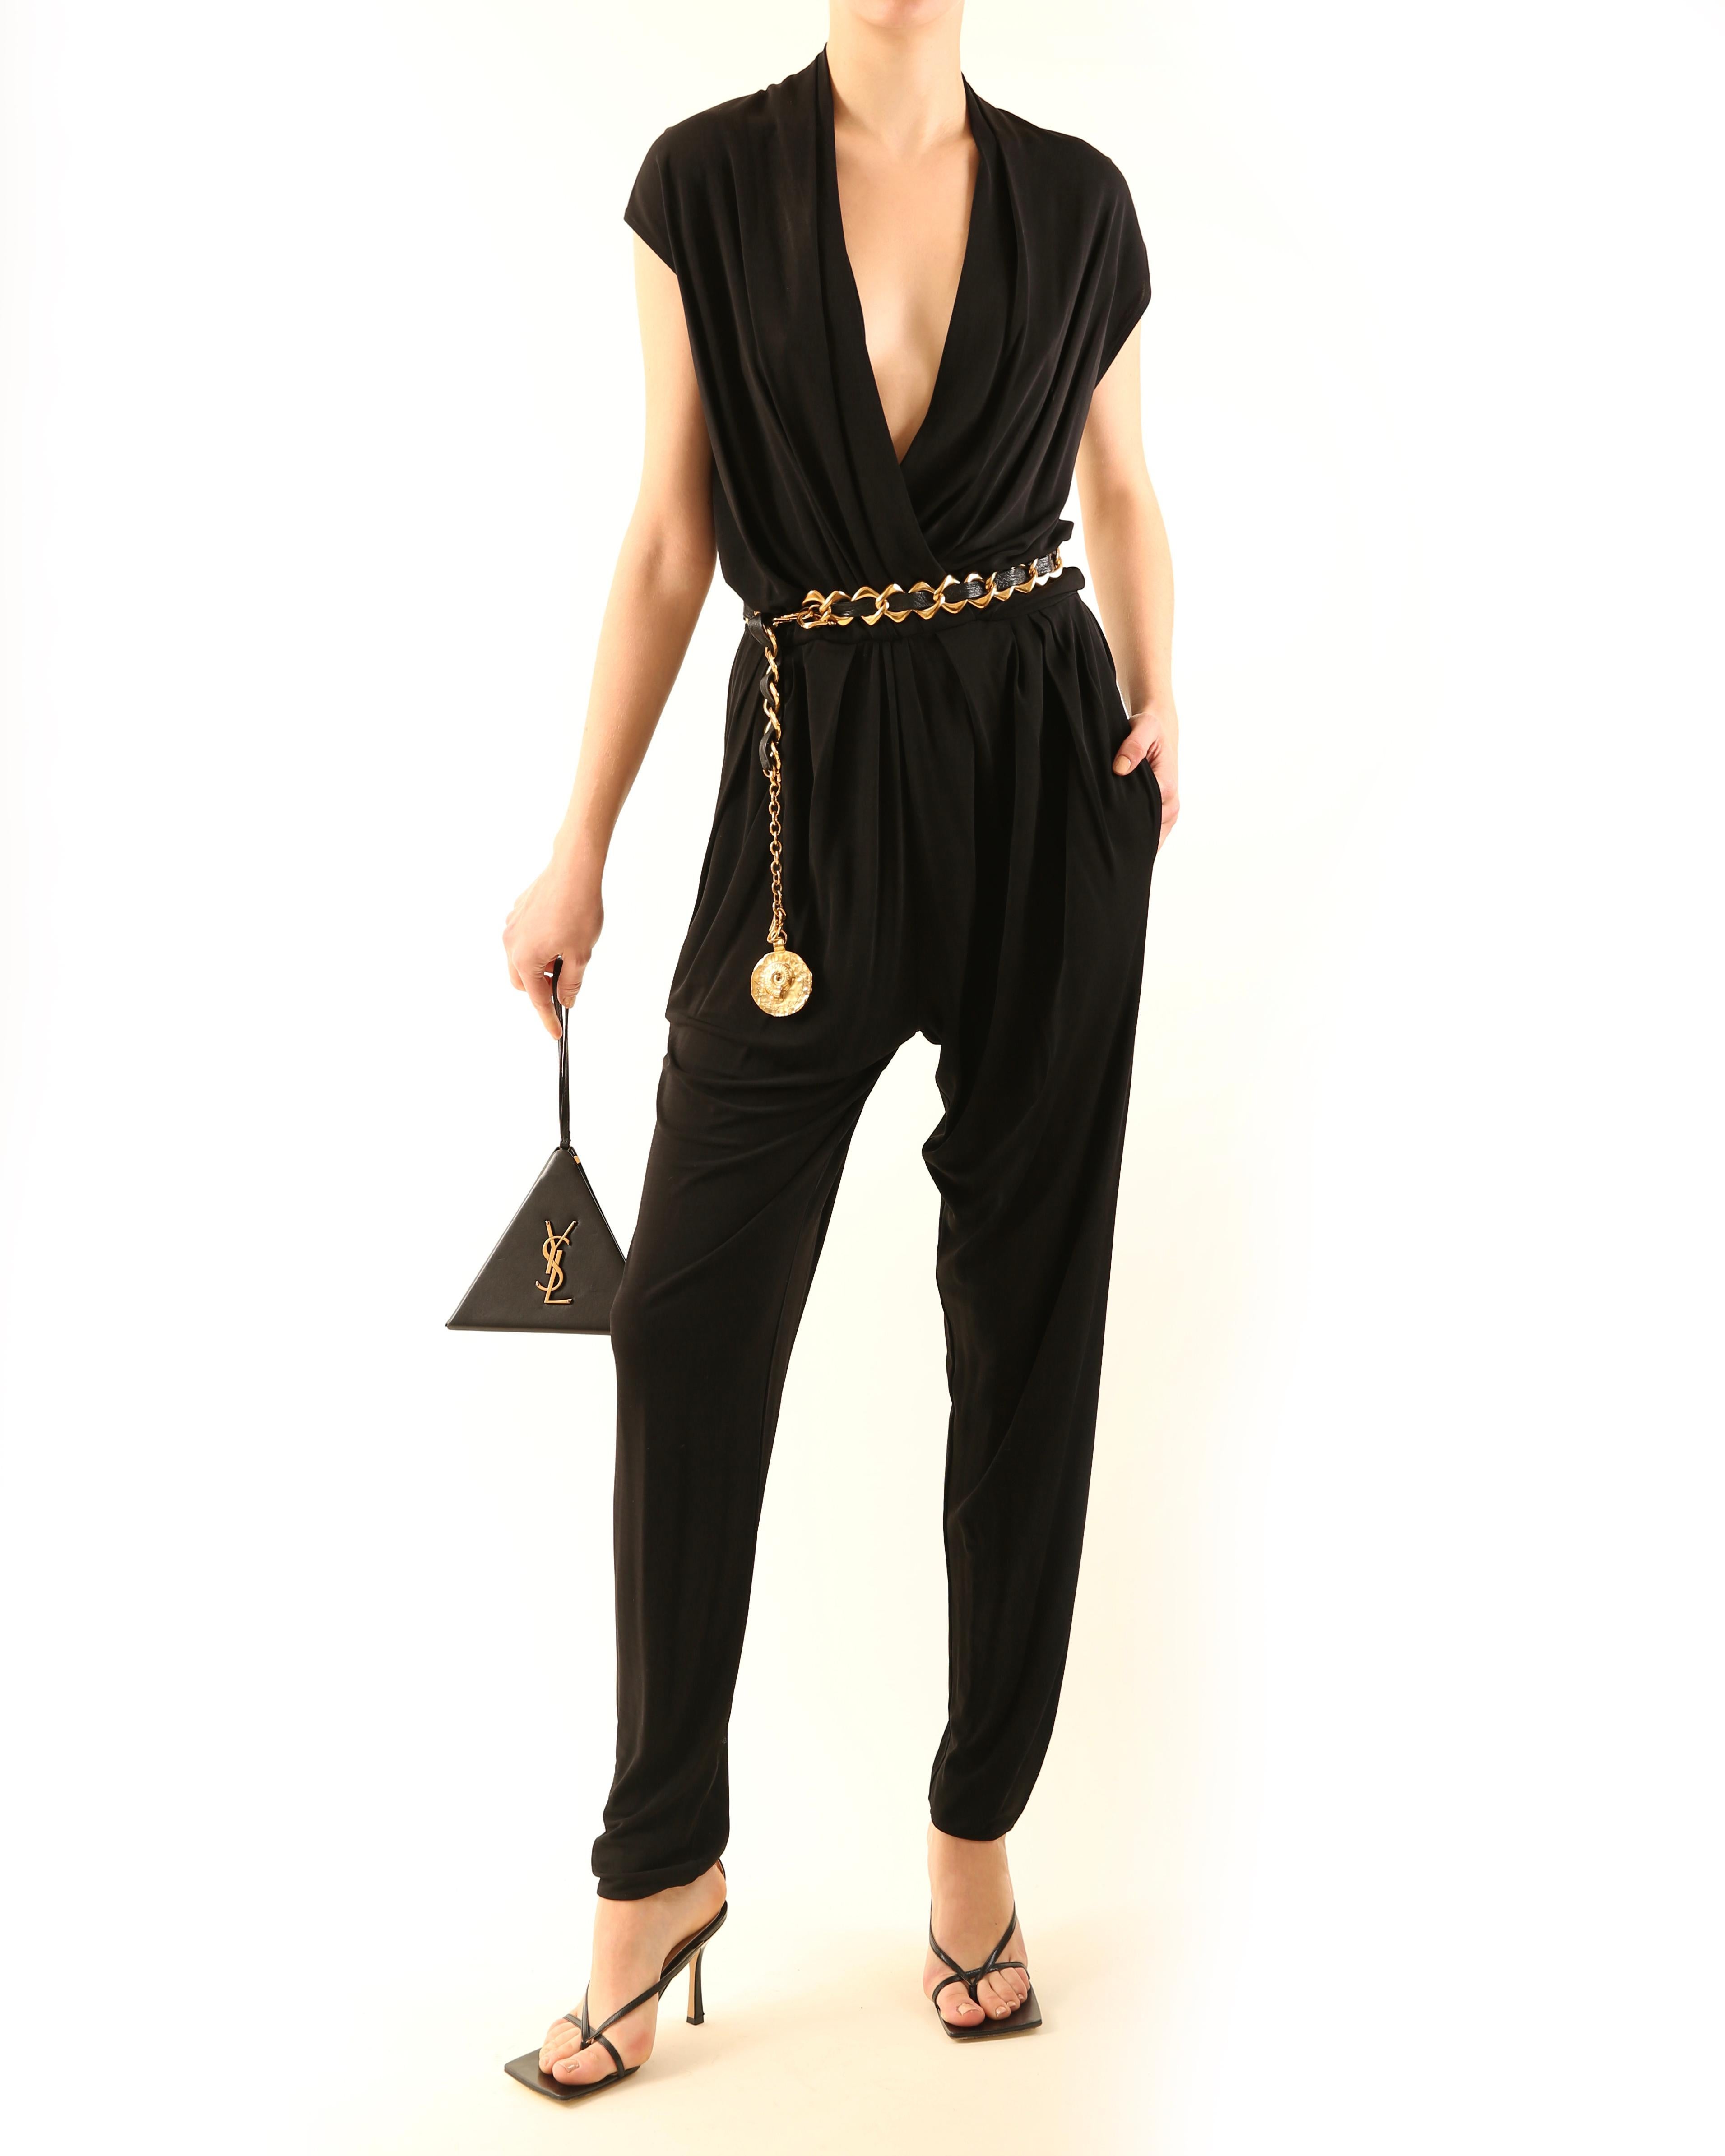 Black Lanvin black plunging neckline low cut sleeveless tapered pant jumpsuit  For Sale